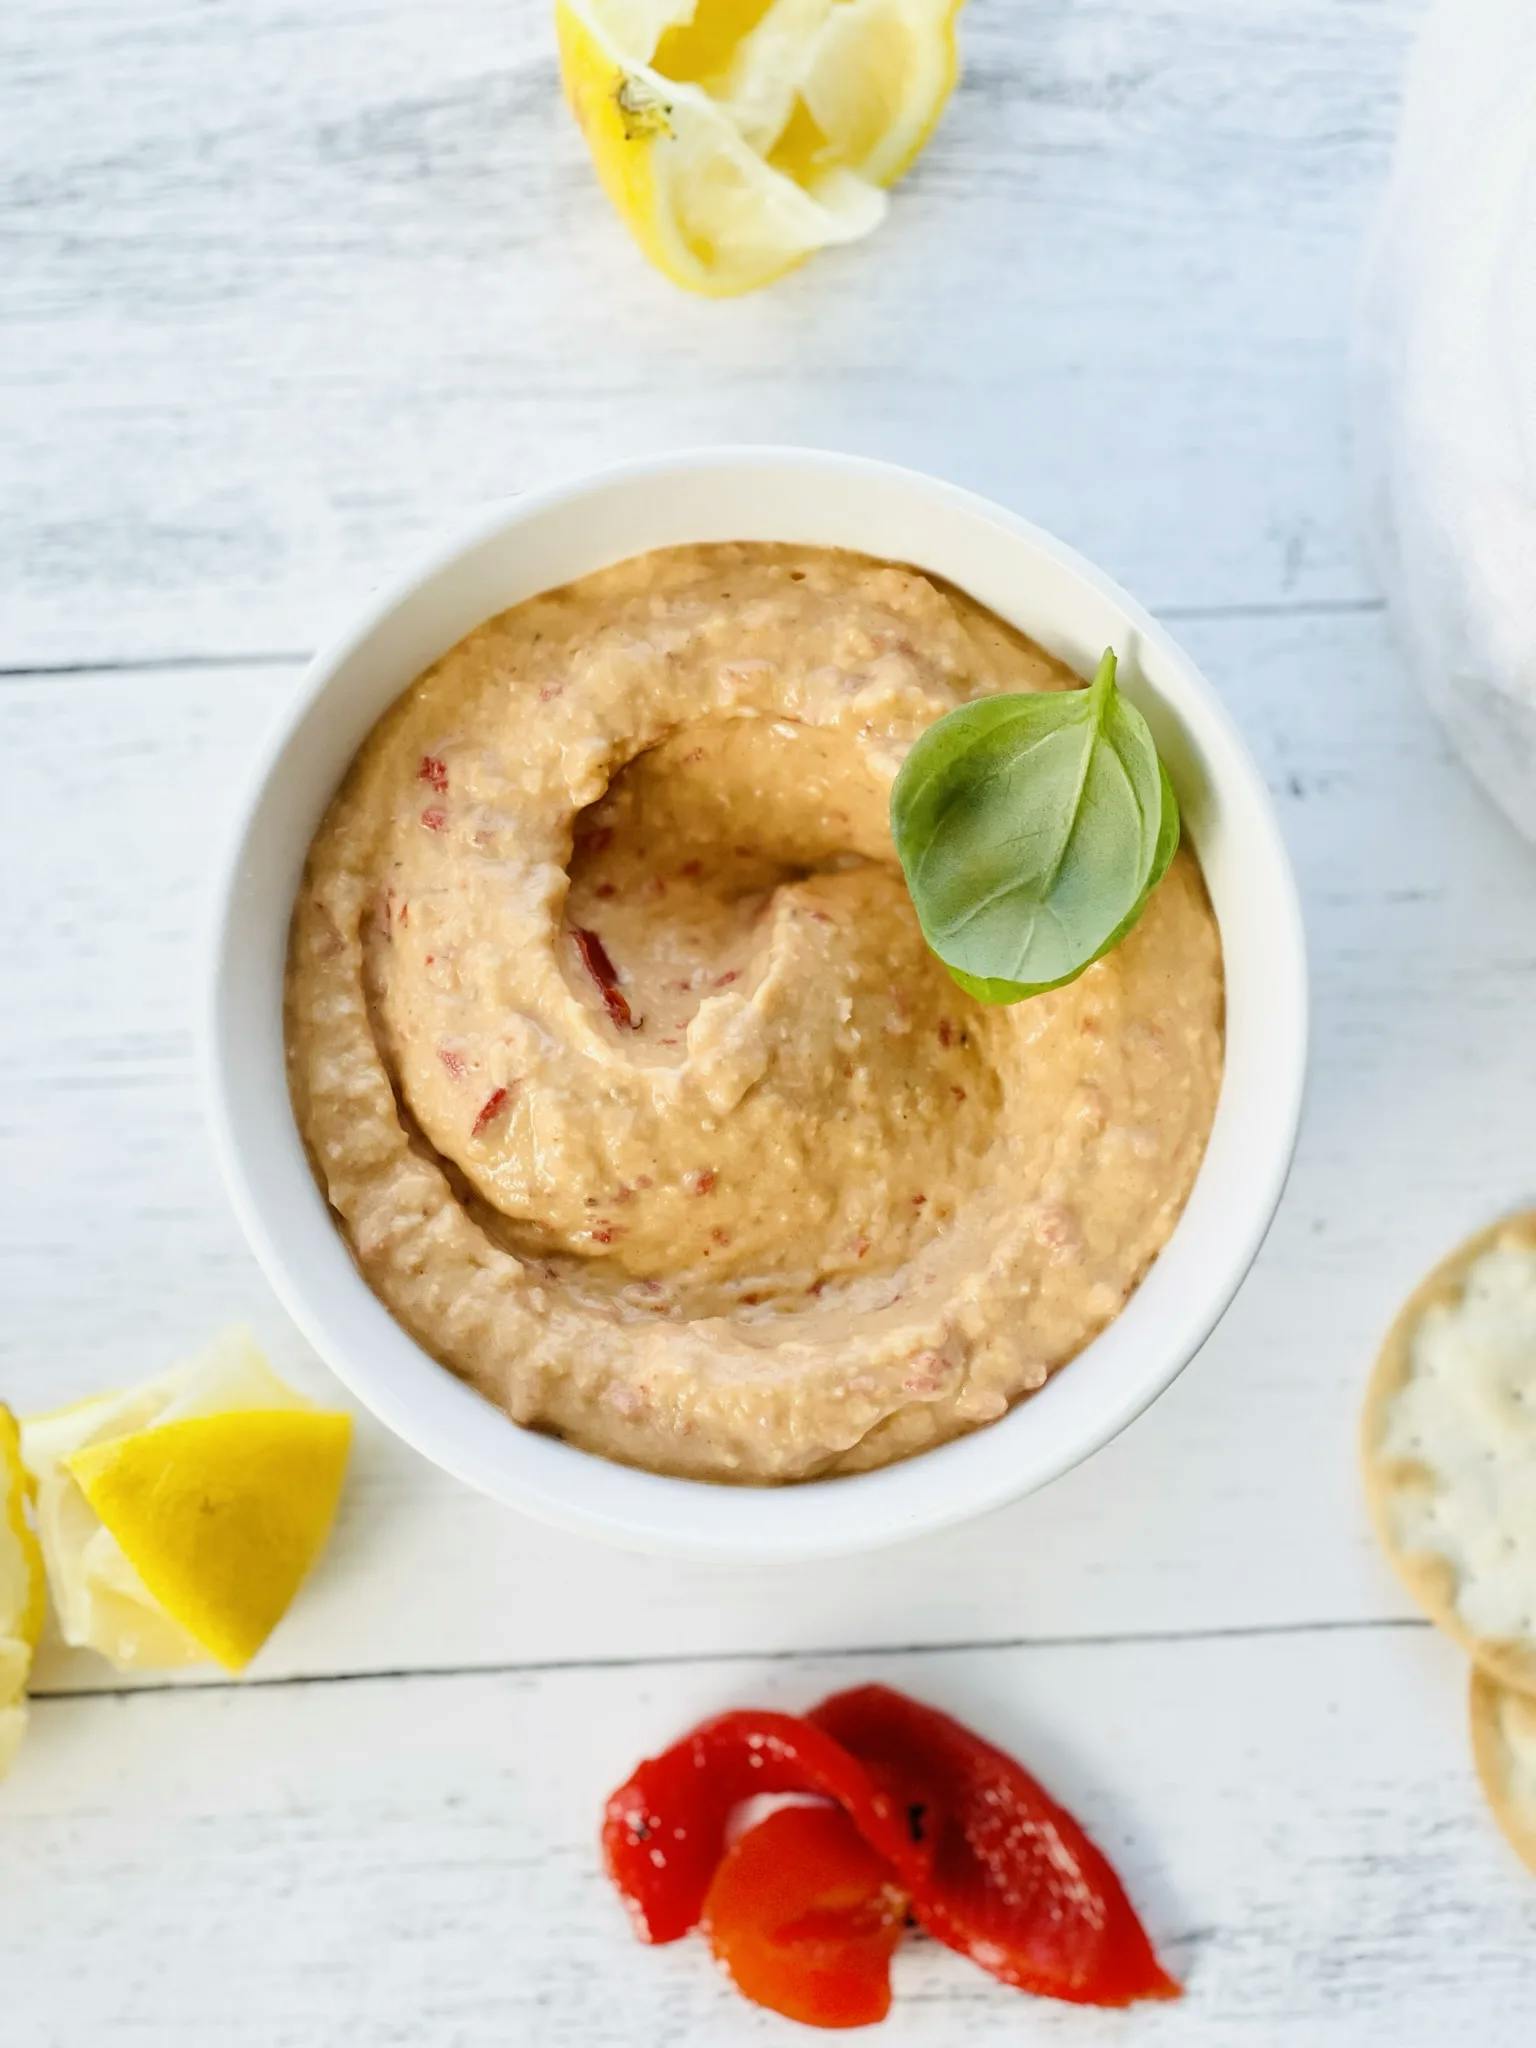 Picture for Red & Black Hummus